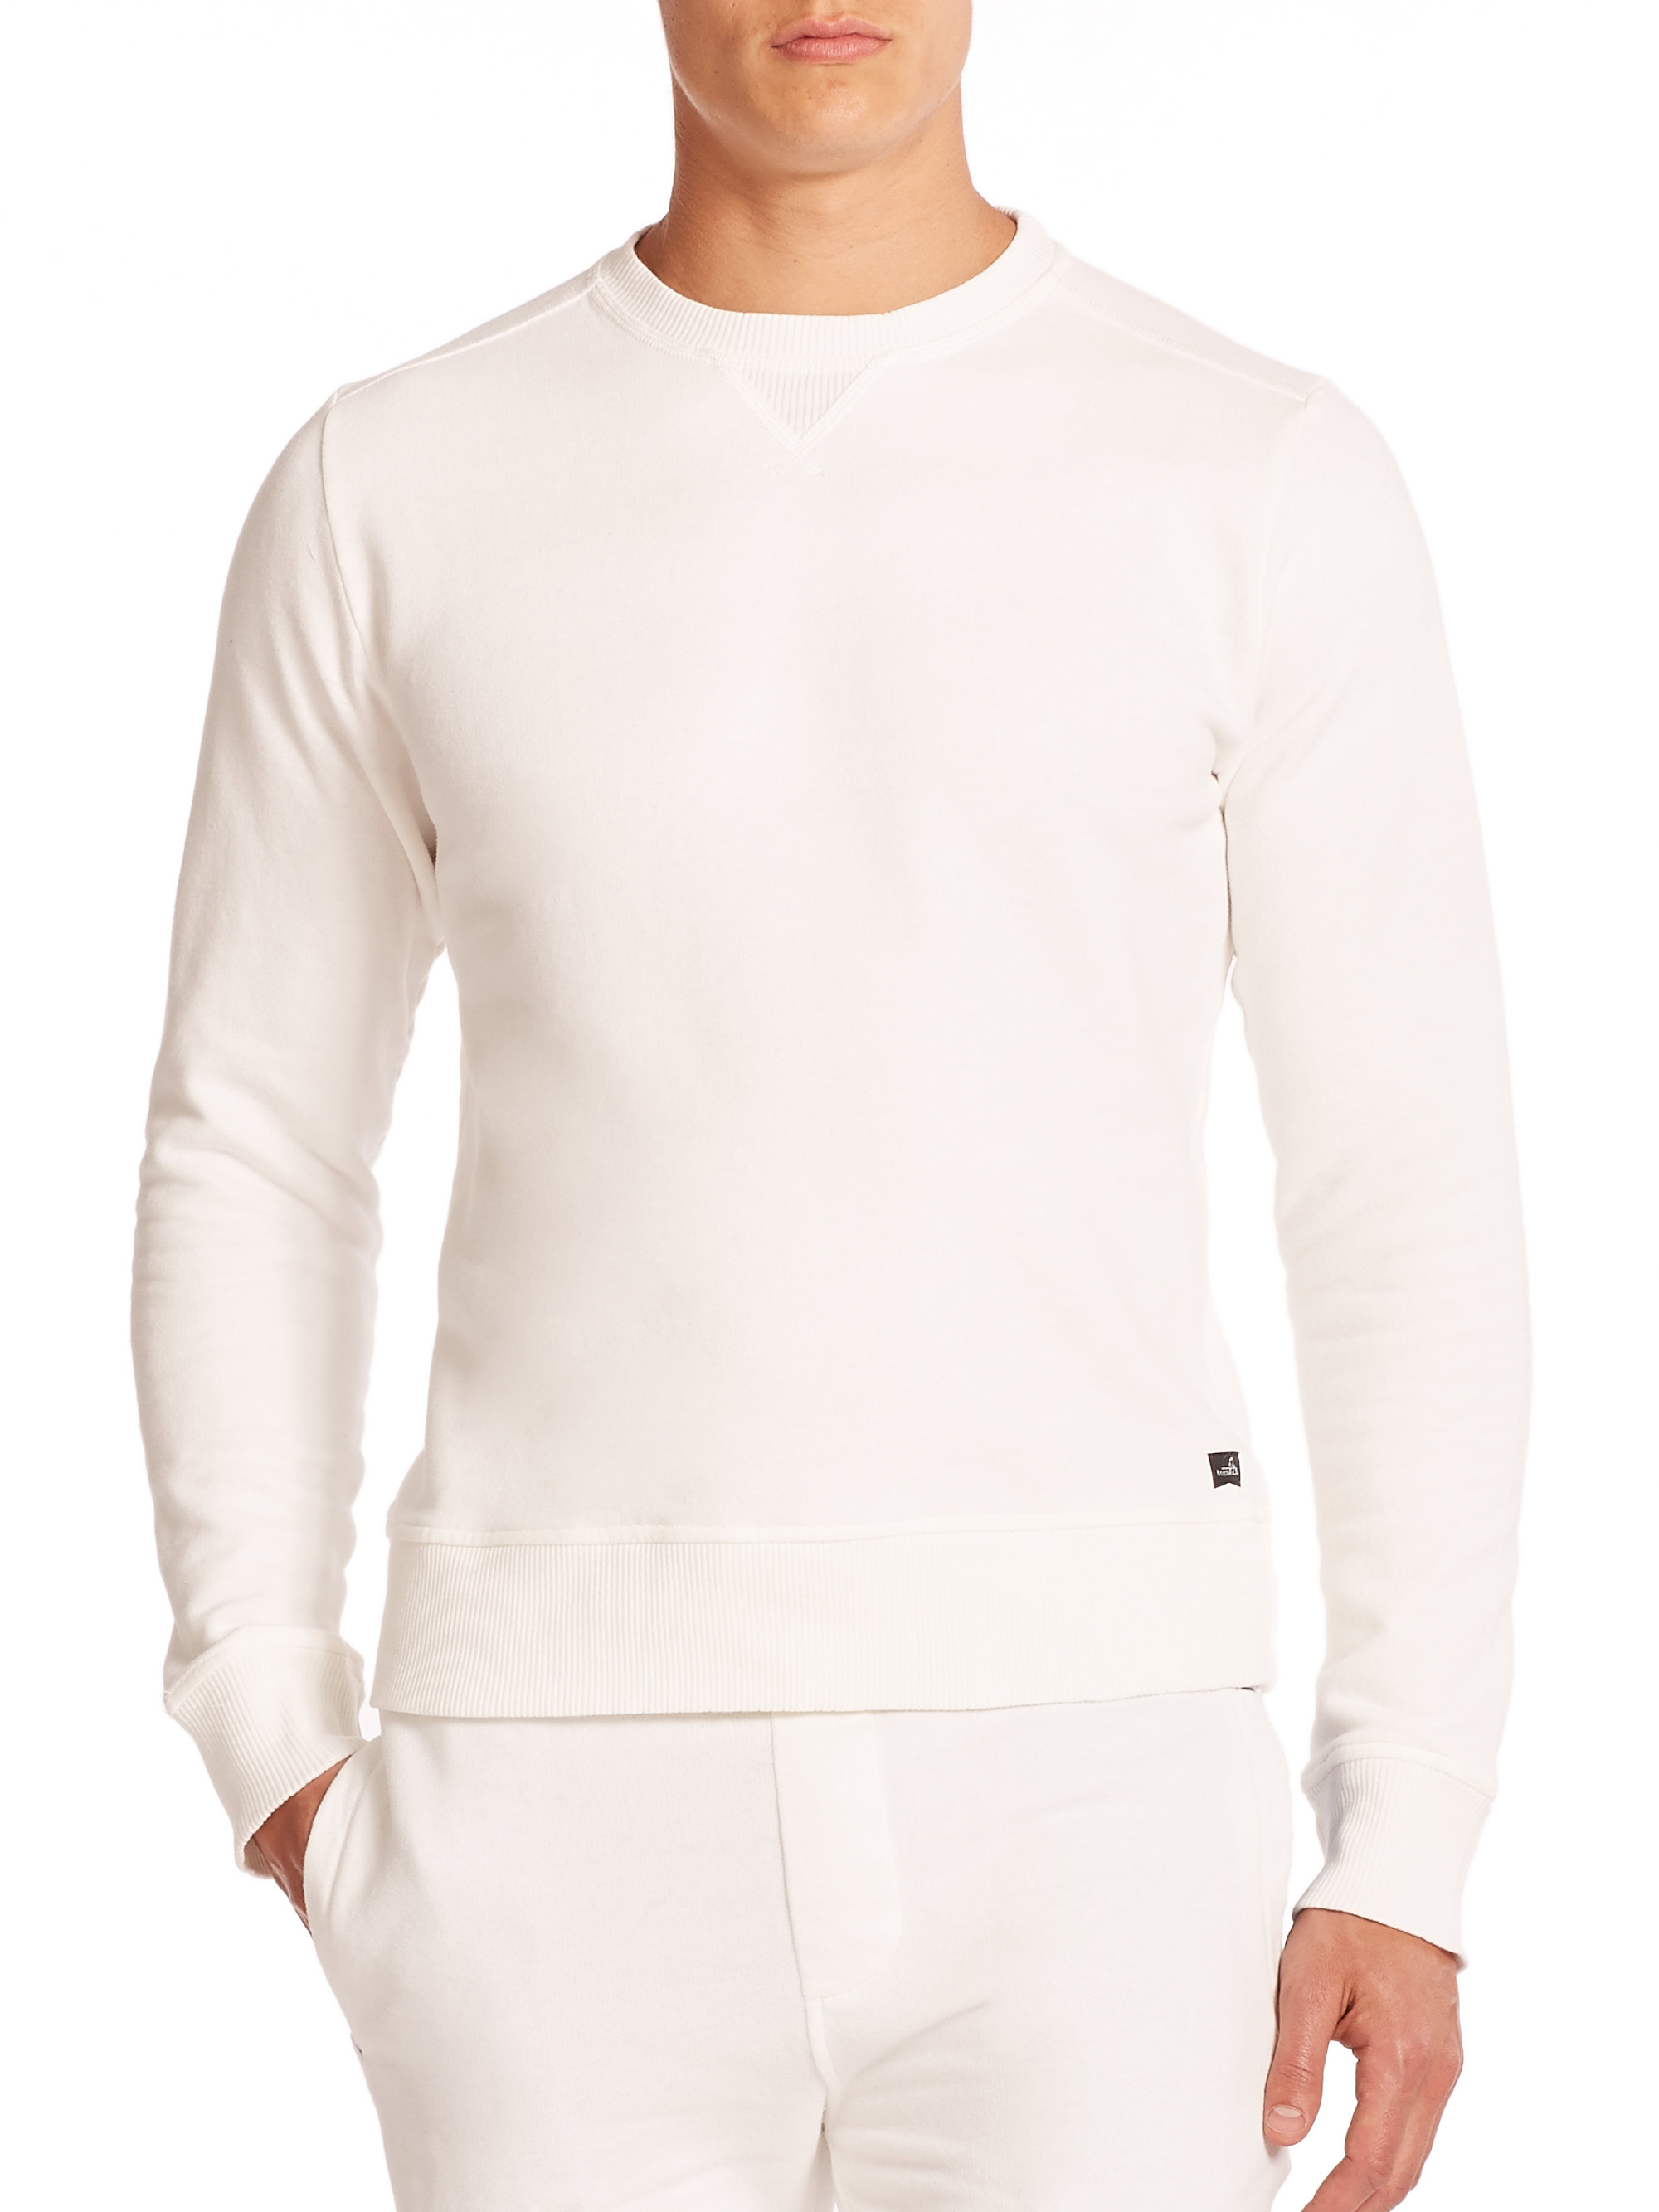 Wahts Cotton & Cashmere Crewneck Sweater in White for Men